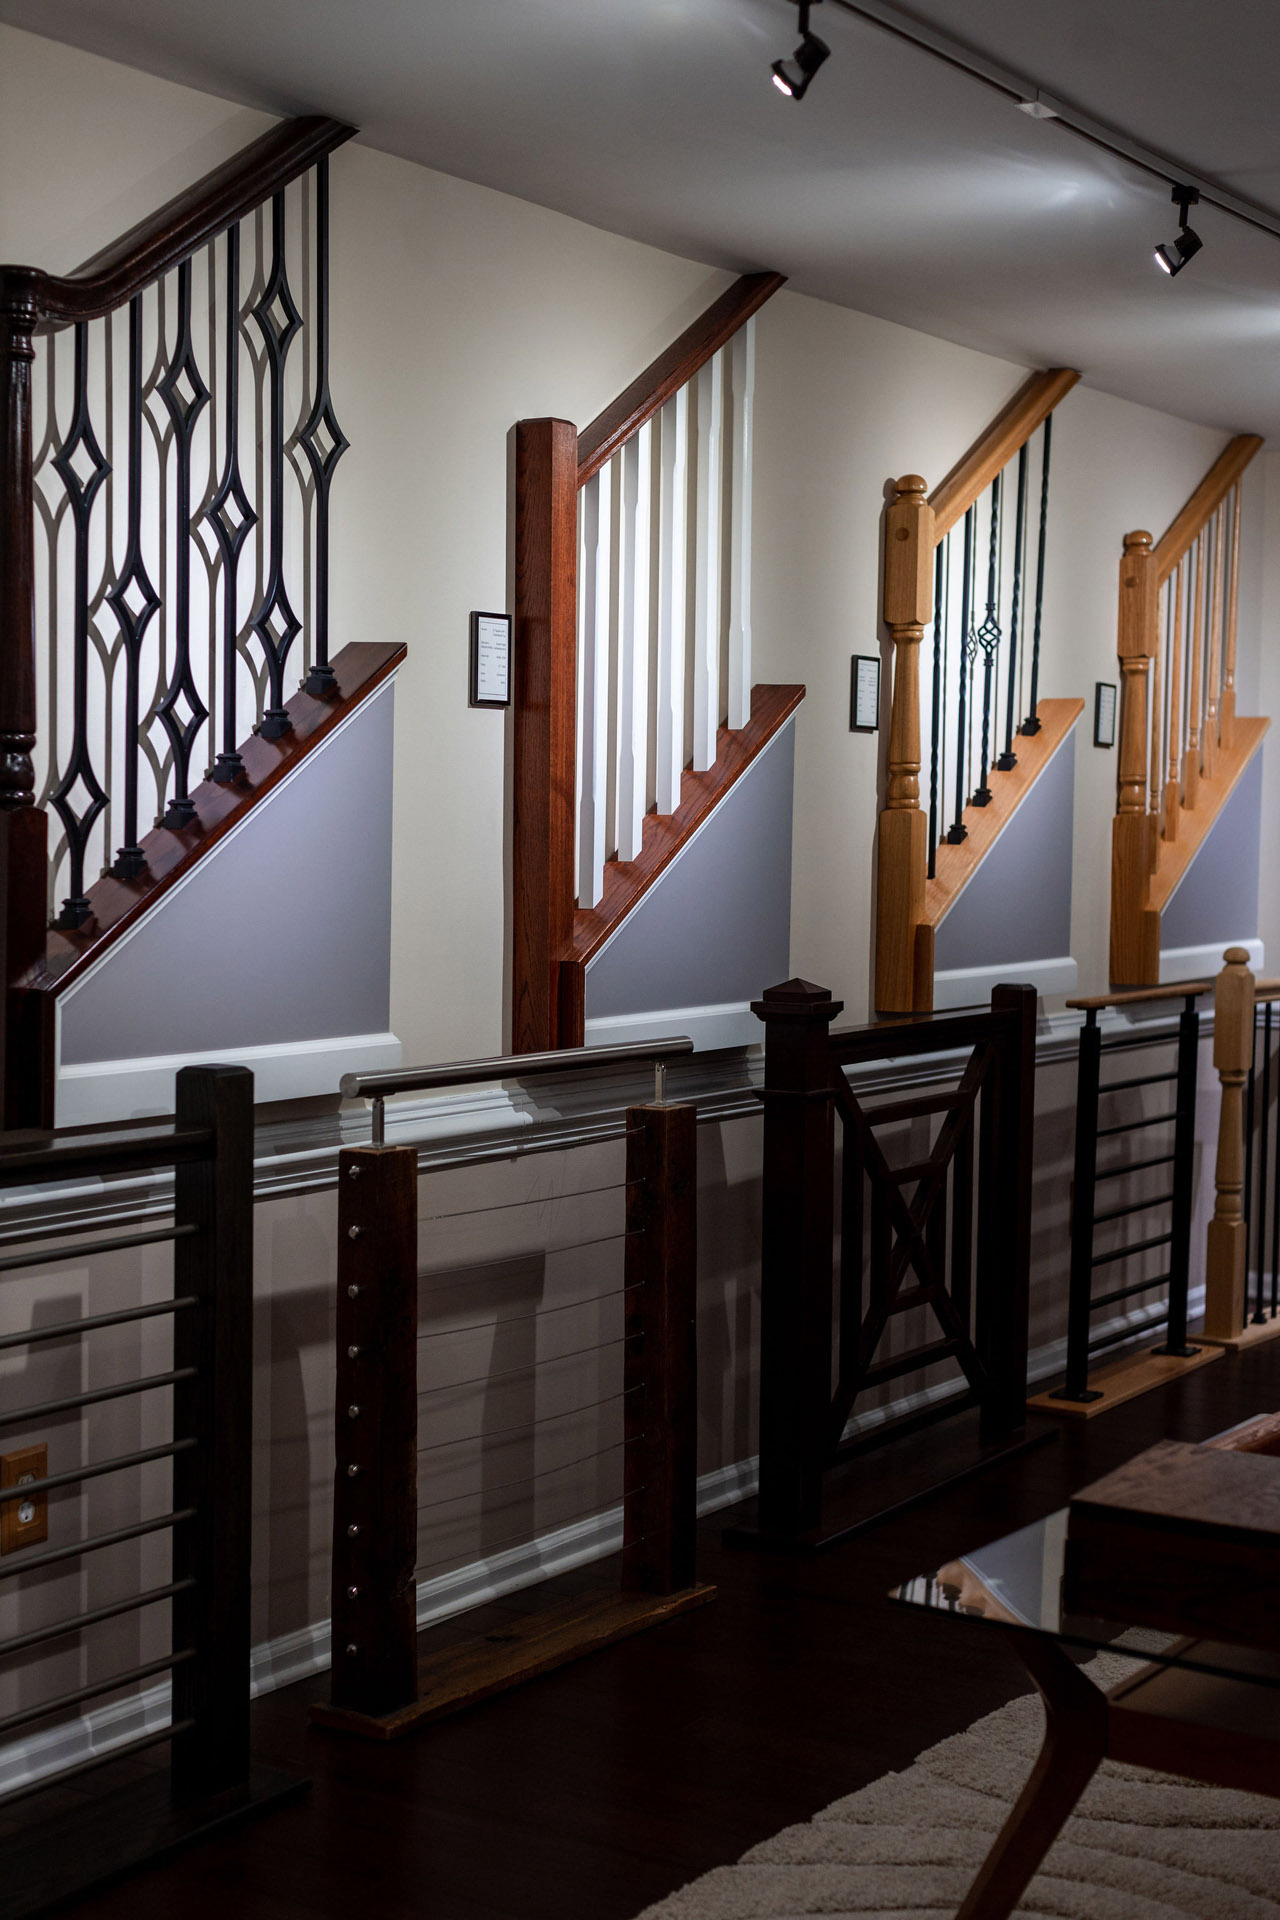 This shows the loudoun stairs showroom which offers a variety of rail options. 